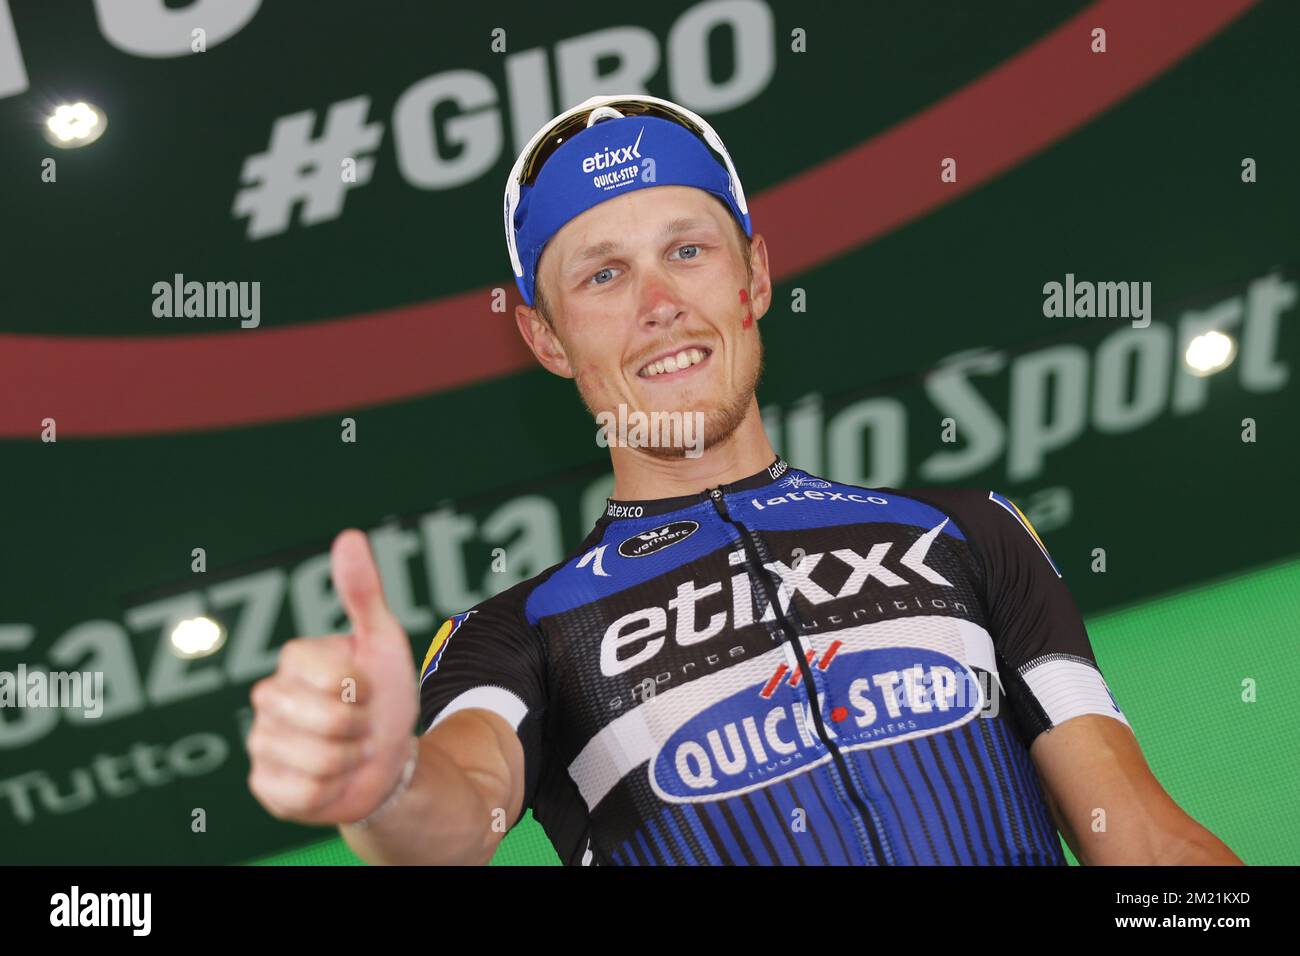 Italian Matteo Trentin of team Etixx - Quick-Step celebrates after winning the eighteenth stage in the 99th edition of the Giro d'Italia cycling race, 240km from Muggio to Pinerolo, on Thursday 26 May 2016, in Italy.  Stock Photo